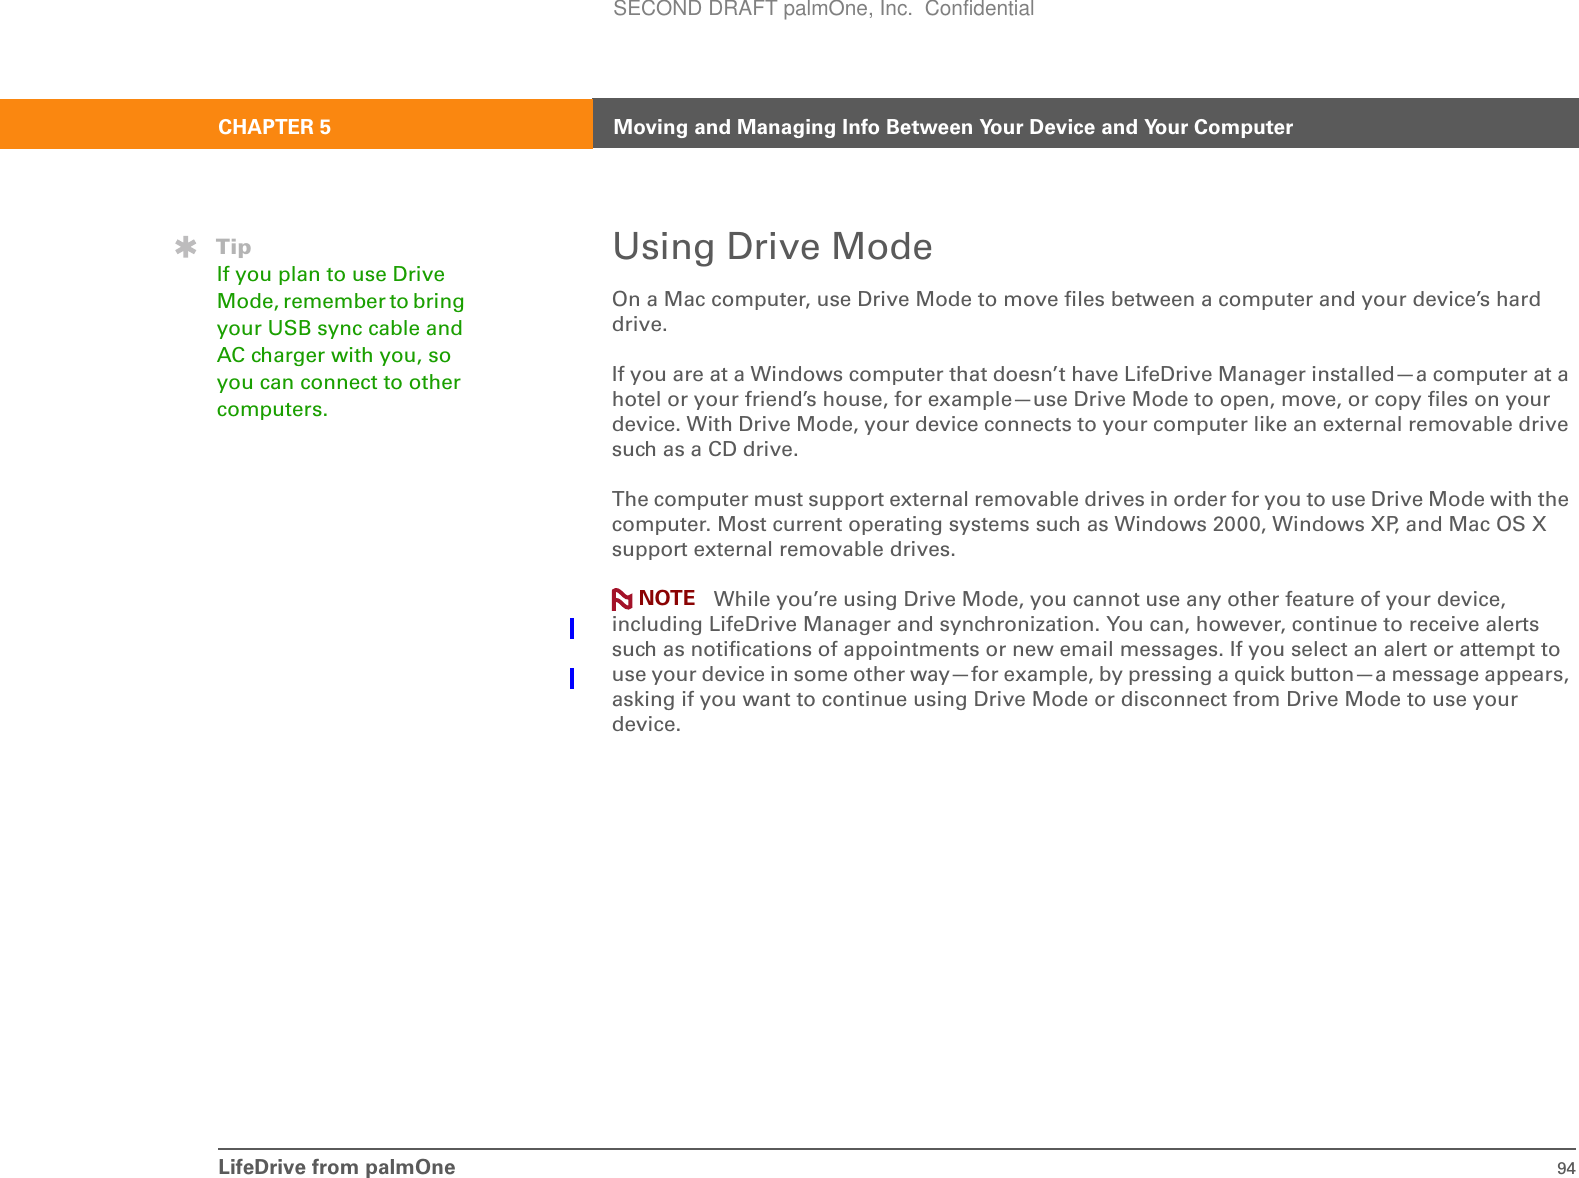 LifeDrive from palmOne 94CHAPTER 5 Moving and Managing Info Between Your Device and Your ComputerUsing Drive ModeOn a Mac computer, use Drive Mode to move files between a computer and your device’s hard drive.If you are at a Windows computer that doesn’t have LifeDrive Manager installed—a computer at a hotel or your friend’s house, for example—use Drive Mode to open, move, or copy files on your device. With Drive Mode, your device connects to your computer like an external removable drive such as a CD drive.The computer must support external removable drives in order for you to use Drive Mode with the computer. Most current operating systems such as Windows 2000, Windows XP, and Mac OS X support external removable drives. While you’re using Drive Mode, you cannot use any other feature of your device, including LifeDrive Manager and synchronization. You can, however, continue to receive alerts such as notifications of appointments or new email messages. If you select an alert or attempt to use your device in some other way—for example, by pressing a quick button—a message appears, asking if you want to continue using Drive Mode or disconnect from Drive Mode to use your device.NOTETipIf you plan to use Drive Mode, remember to bring your USB sync cable and AC charger with you, so you can connect to other computers.SECOND DRAFT palmOne, Inc.  Confidential